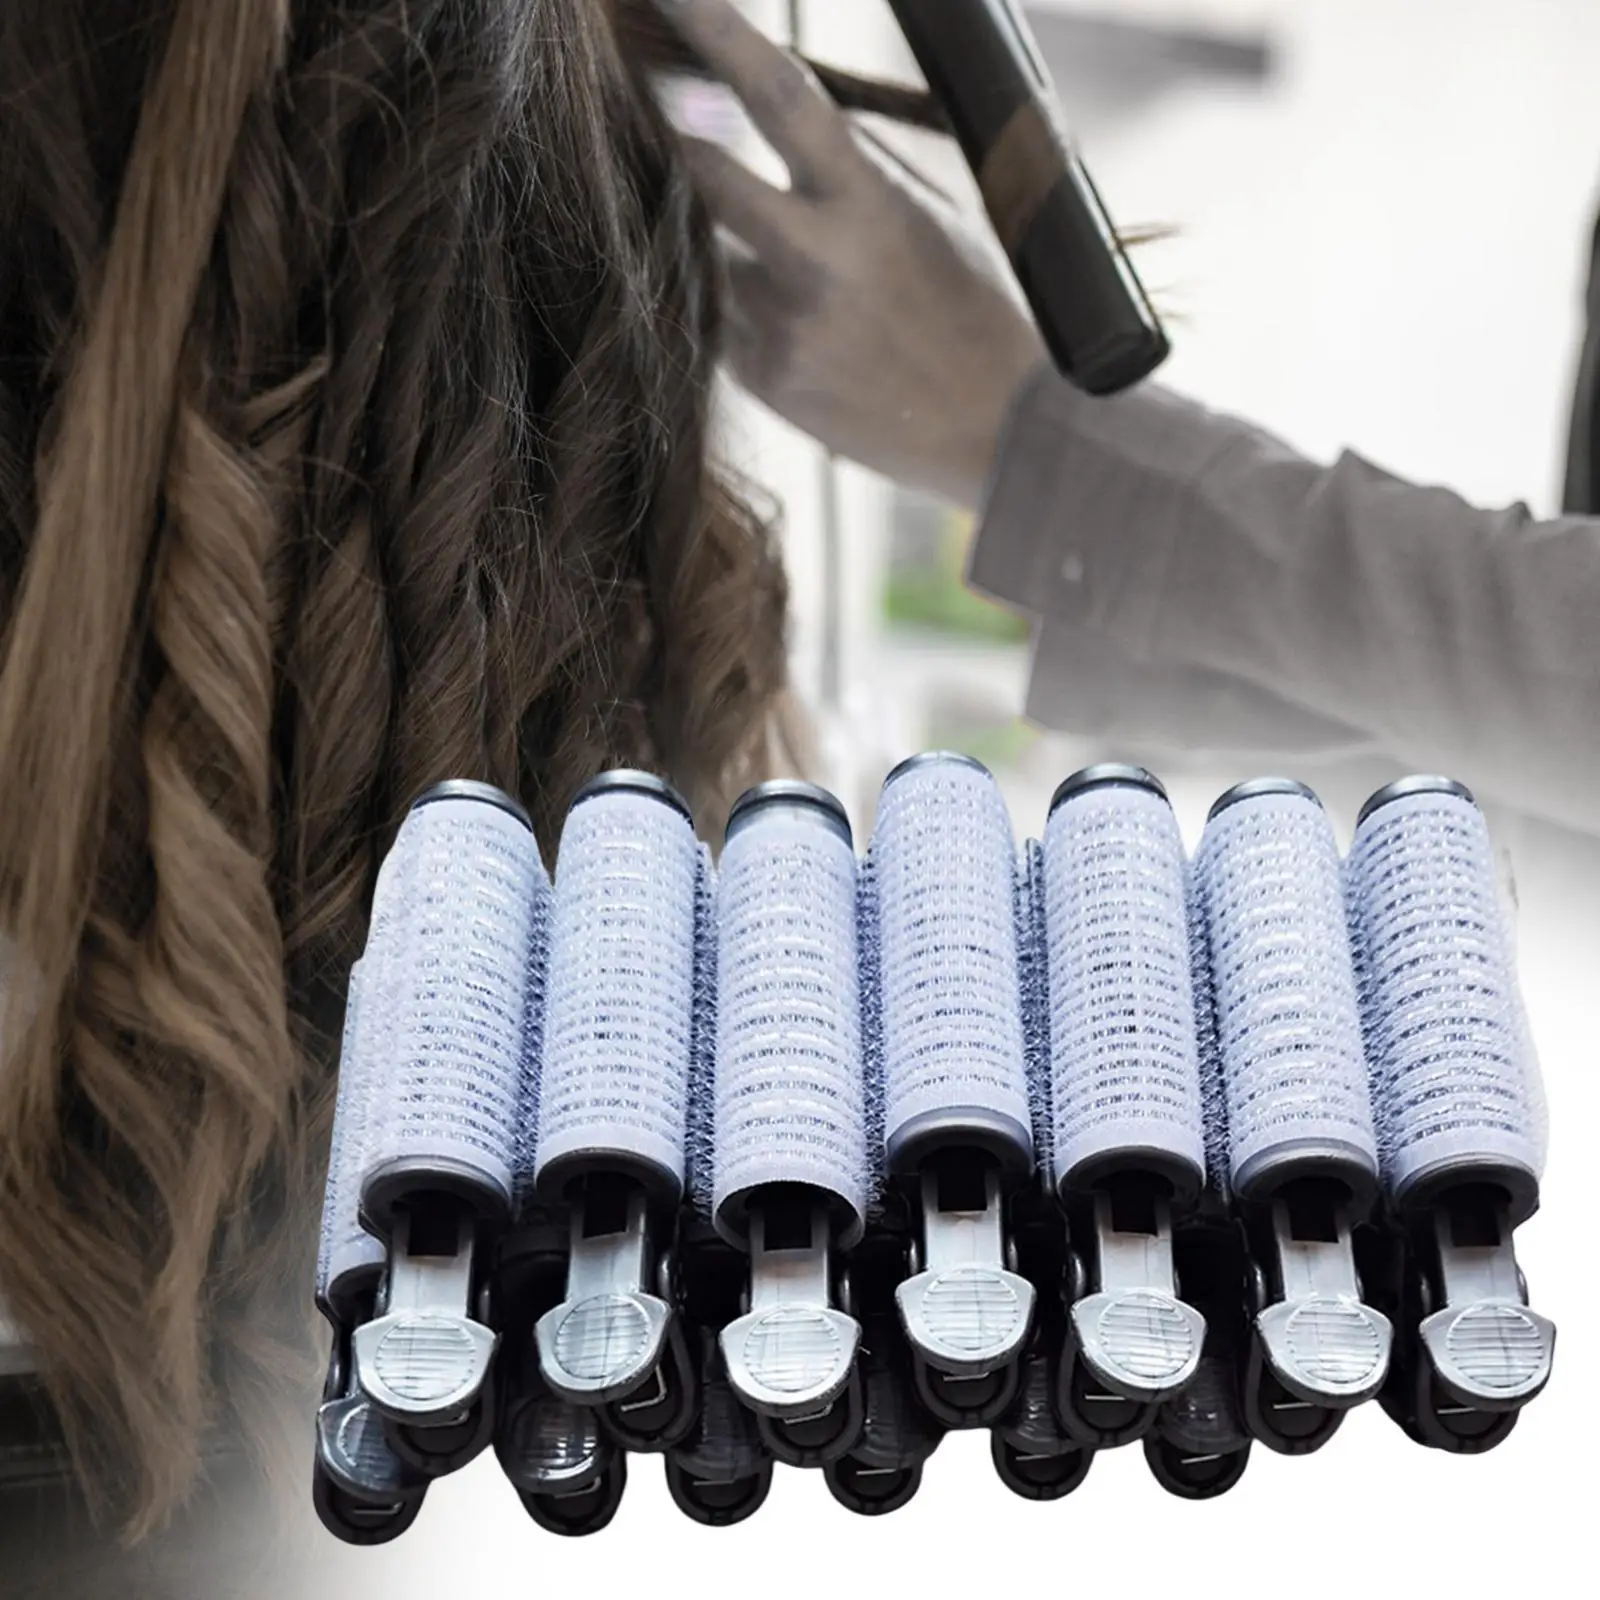 14Pcs Cold Wave Hair Roller DIY Curling Tool Cold Ironing Hair Tools for Barbershop Ironed The Curling Iron for Medium Hair Girl